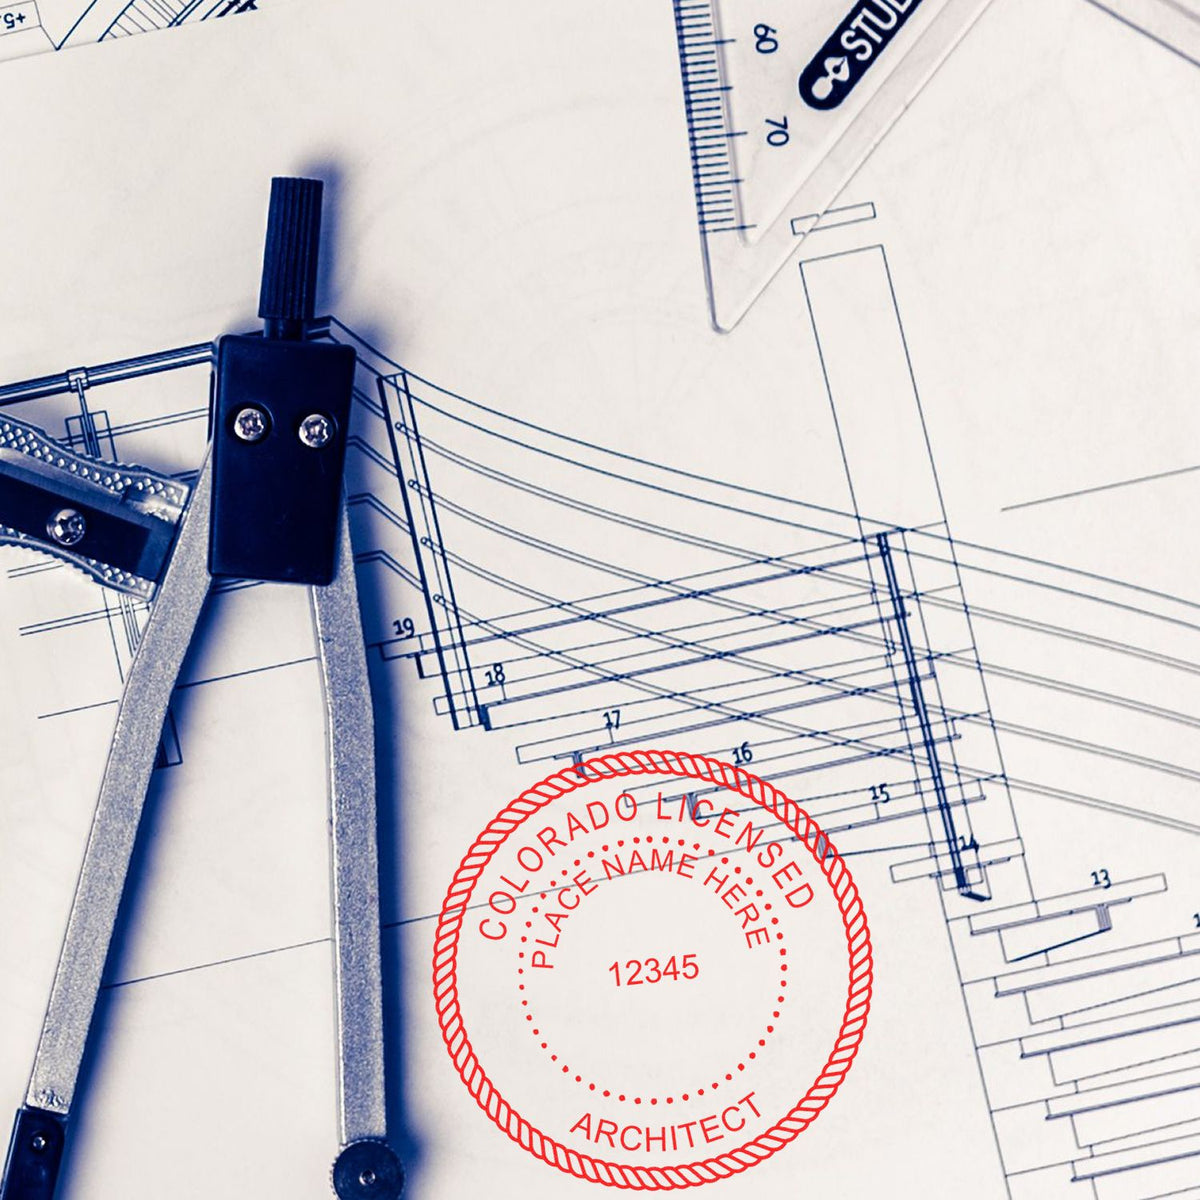 The Slim Pre-Inked Colorado Architect Seal Stamp stamp impression comes to life with a crisp, detailed photo on paper - showcasing true professional quality.